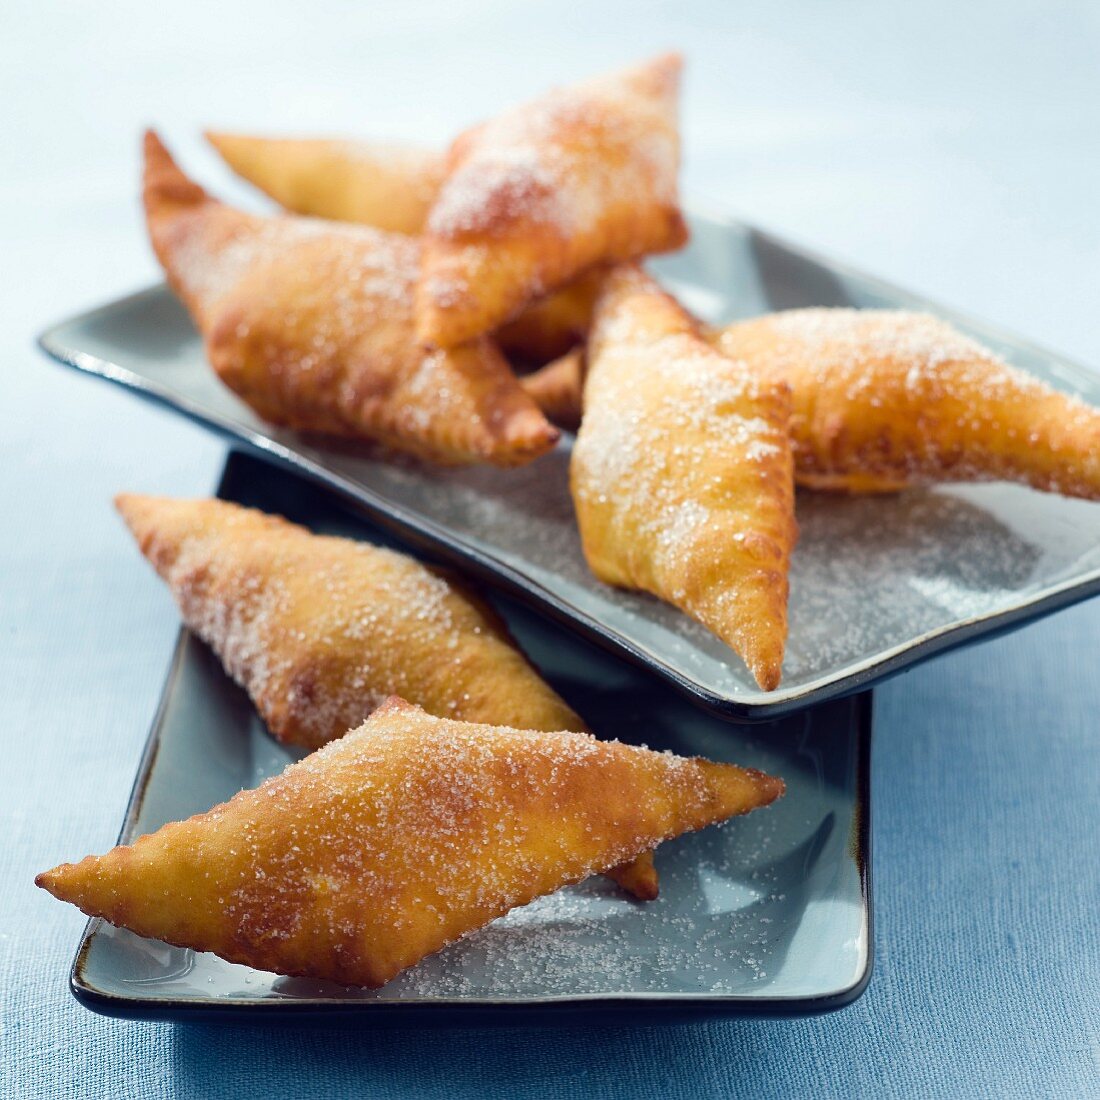 Merveilles (deep-fried French pastries)